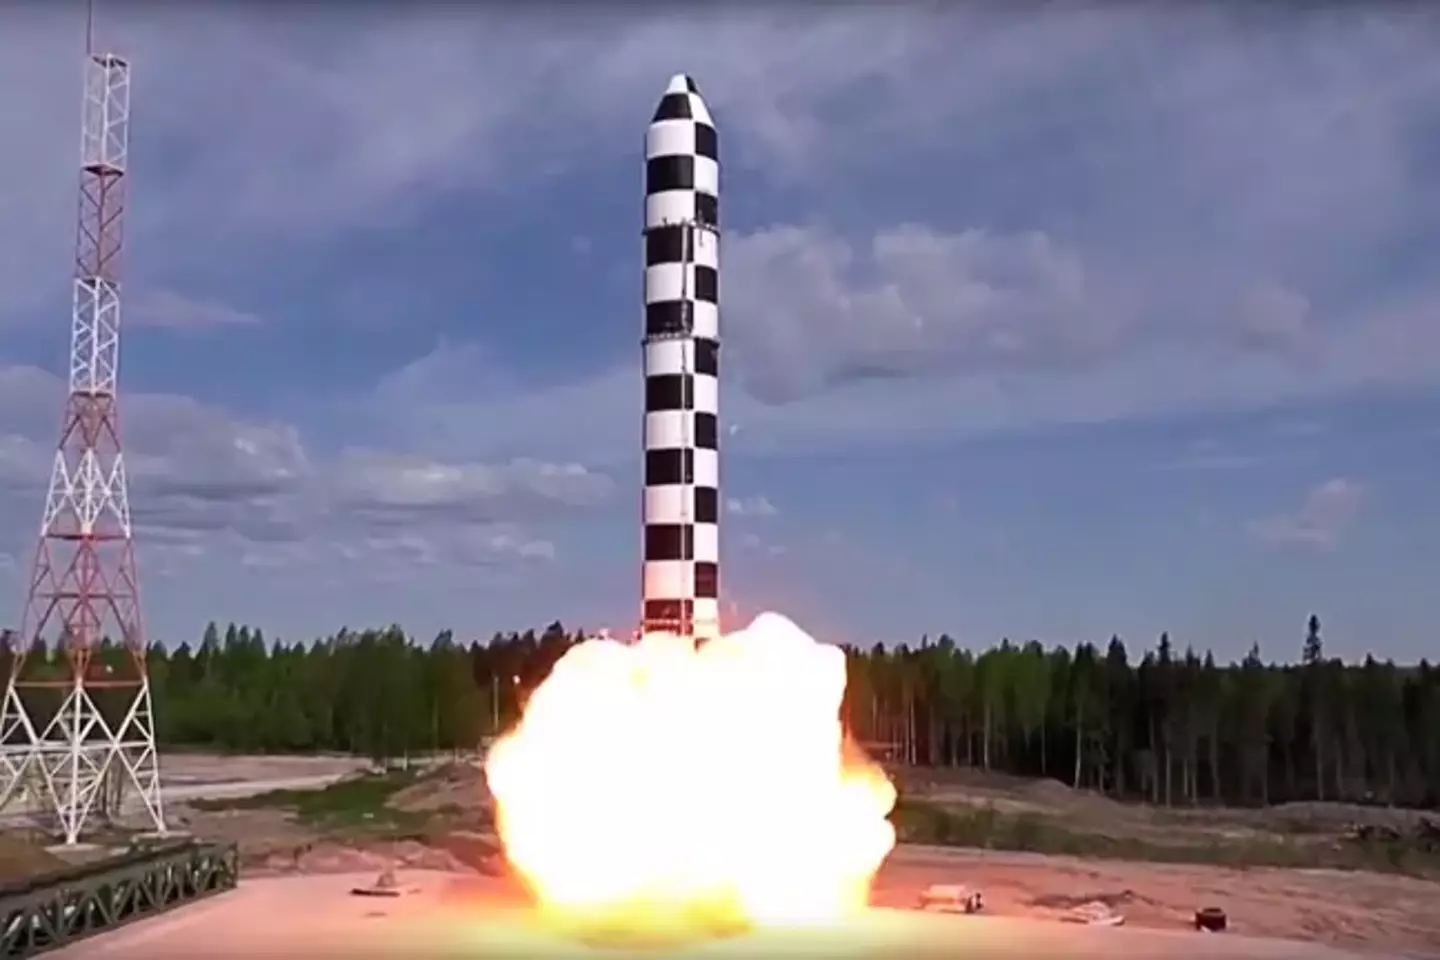 Russia tested the RS-28 Sarmat liquid-fueled superheavy intercontinental ballistic missile back in 2018.